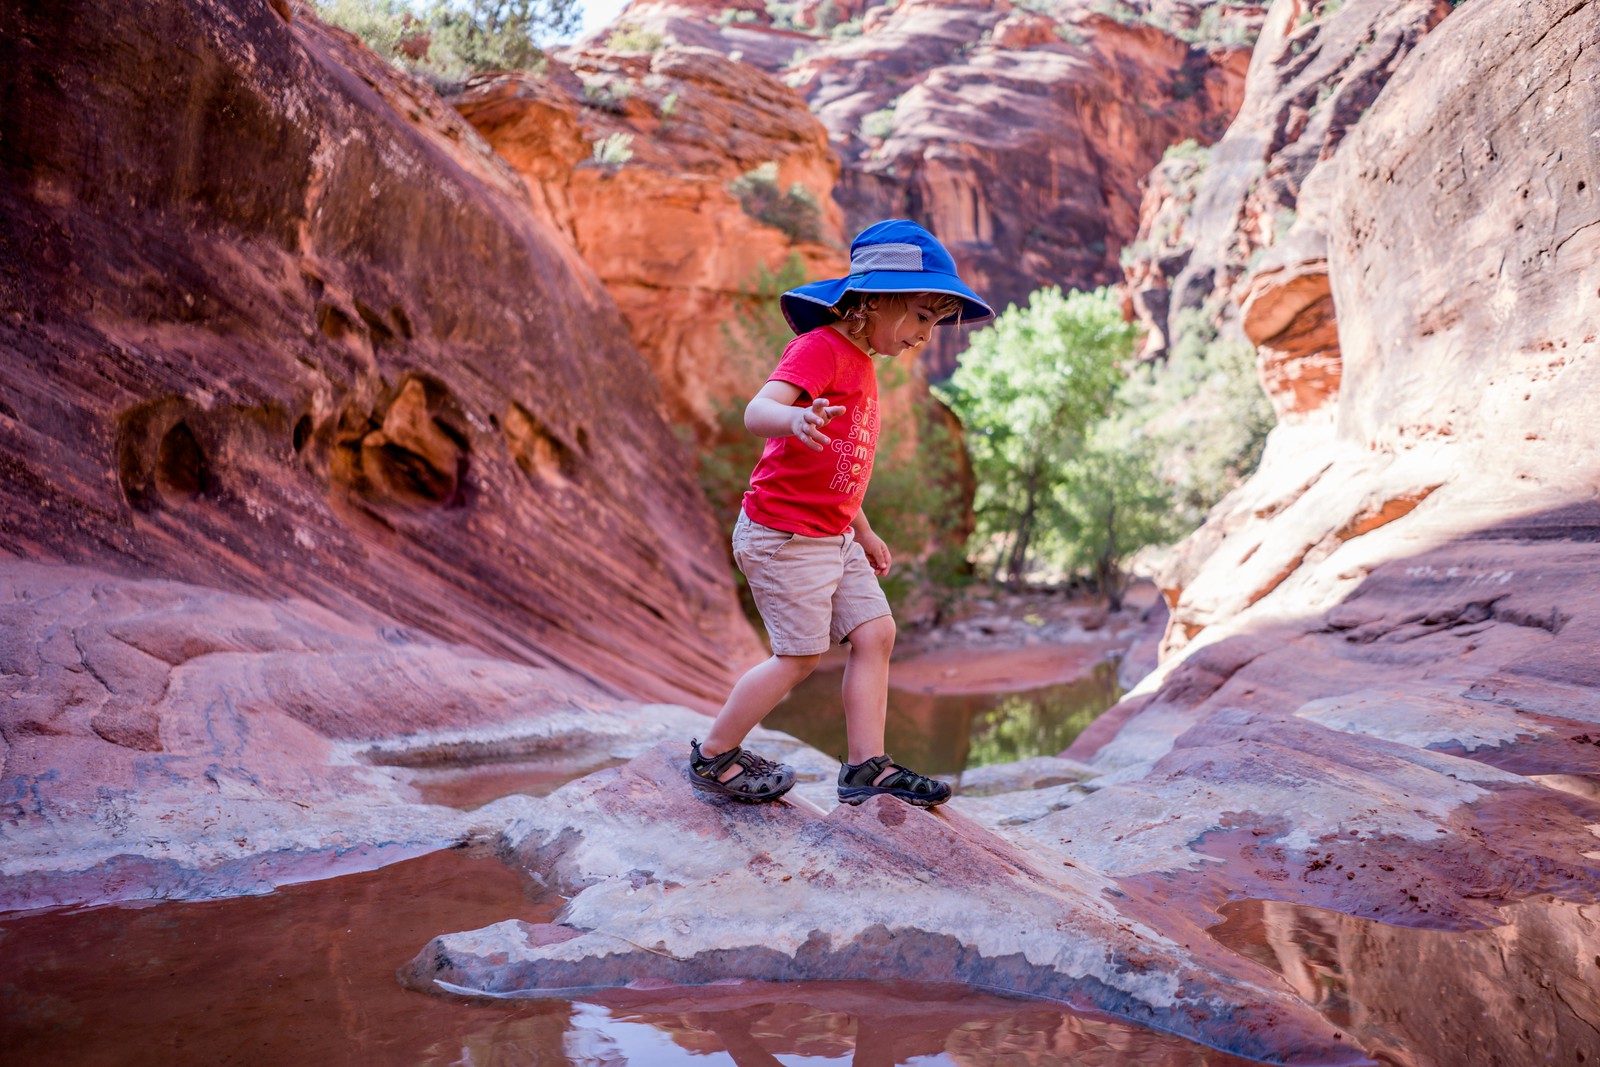 How to keep kiddos cool on trail when hiking in summer by Becca Hosley for Hike it Baby